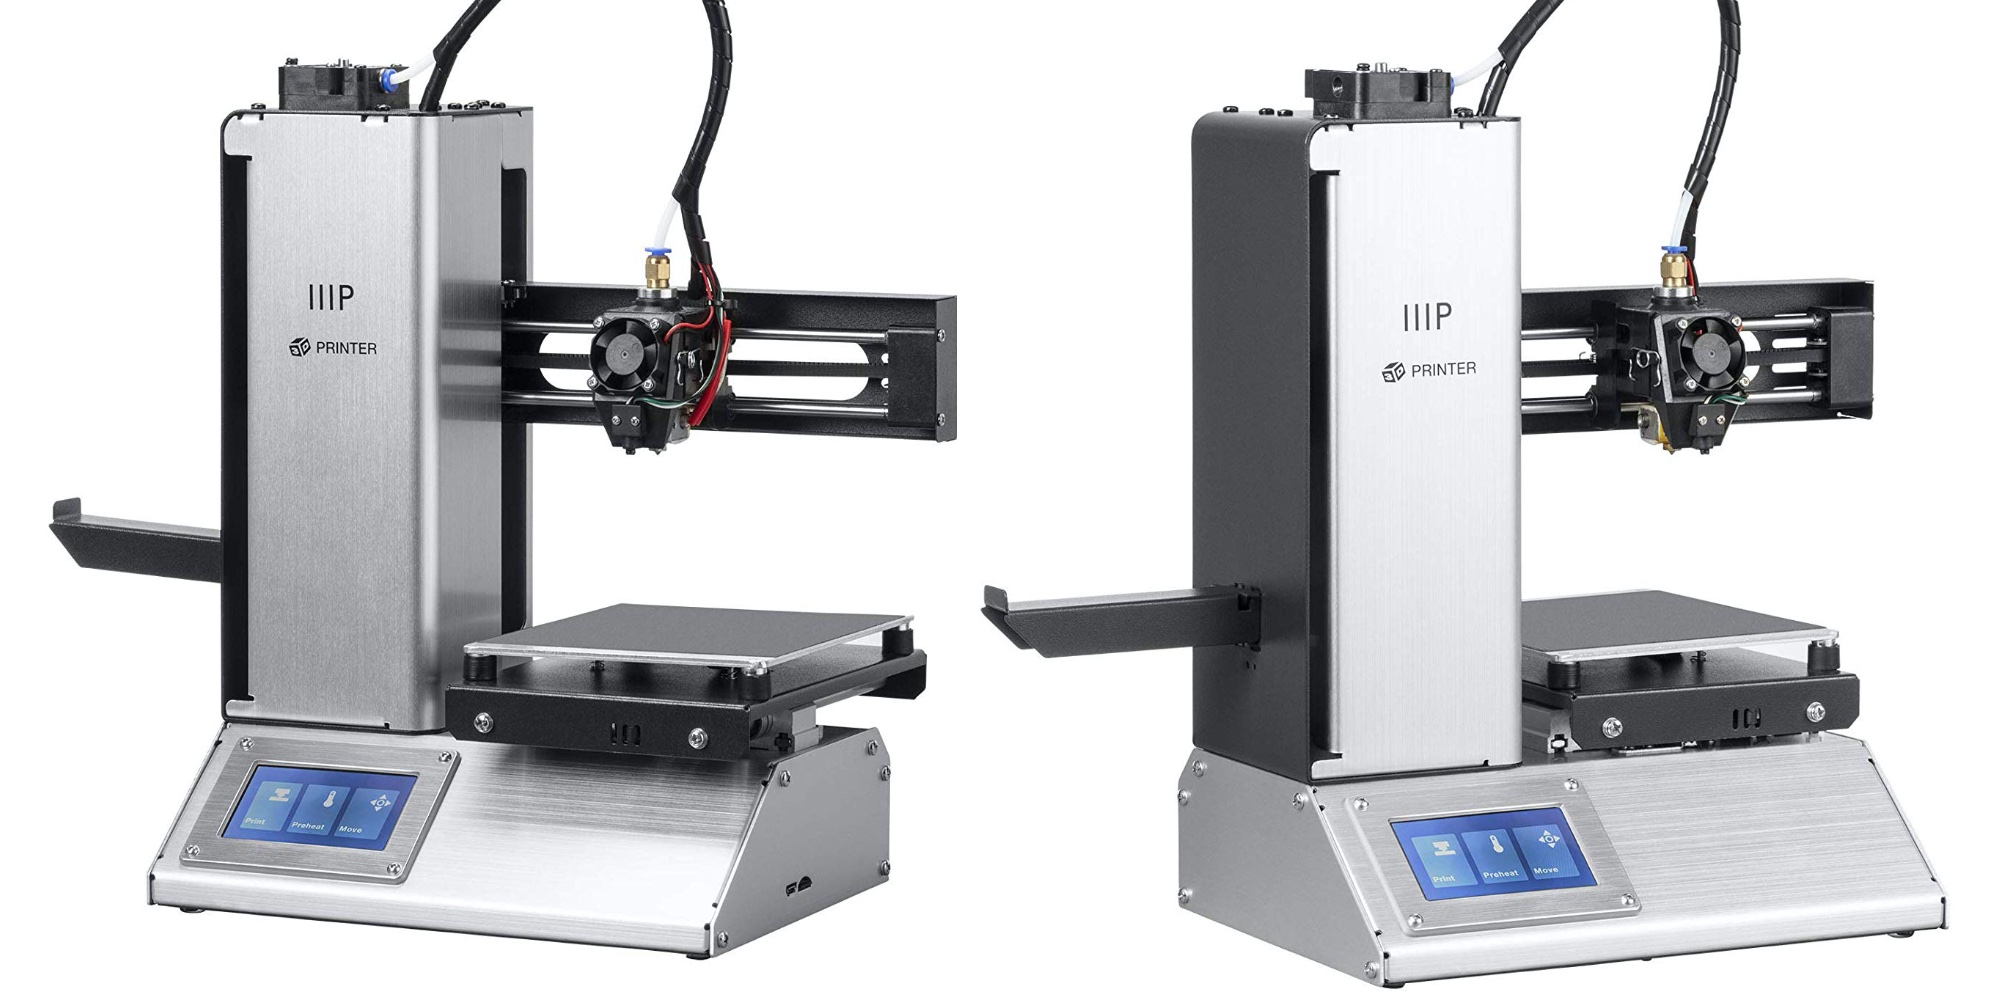 Monoprice's MP Select Mini 3D Printer returns to all-time low at $170